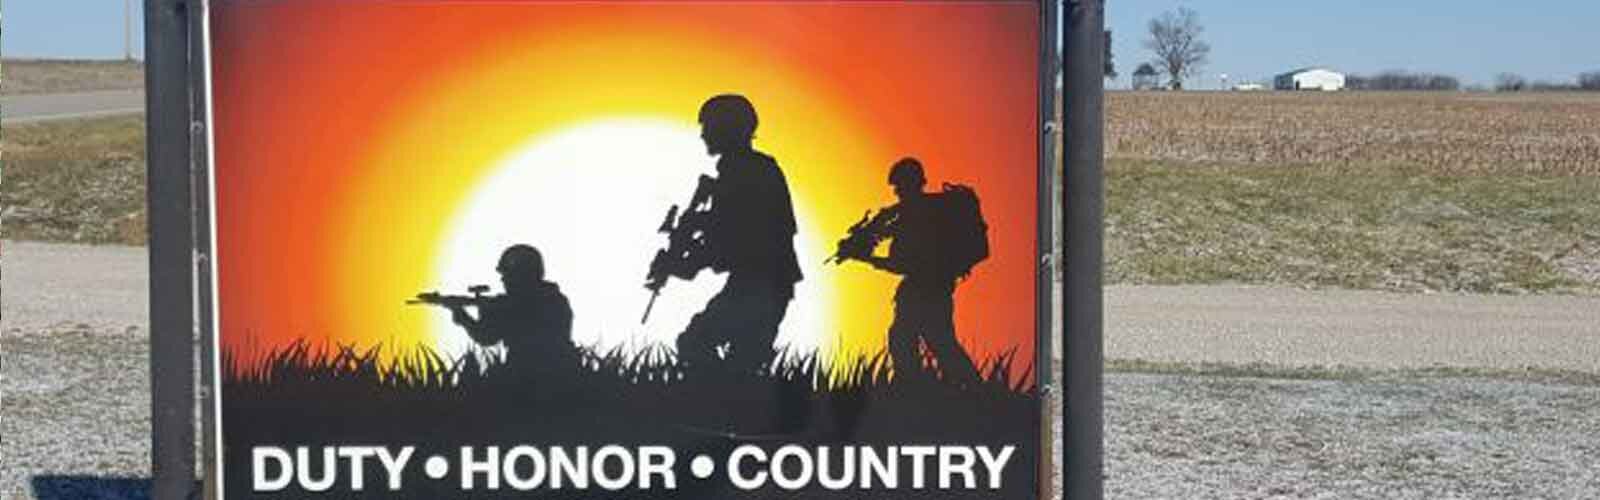 Duty, Honor, Country sign